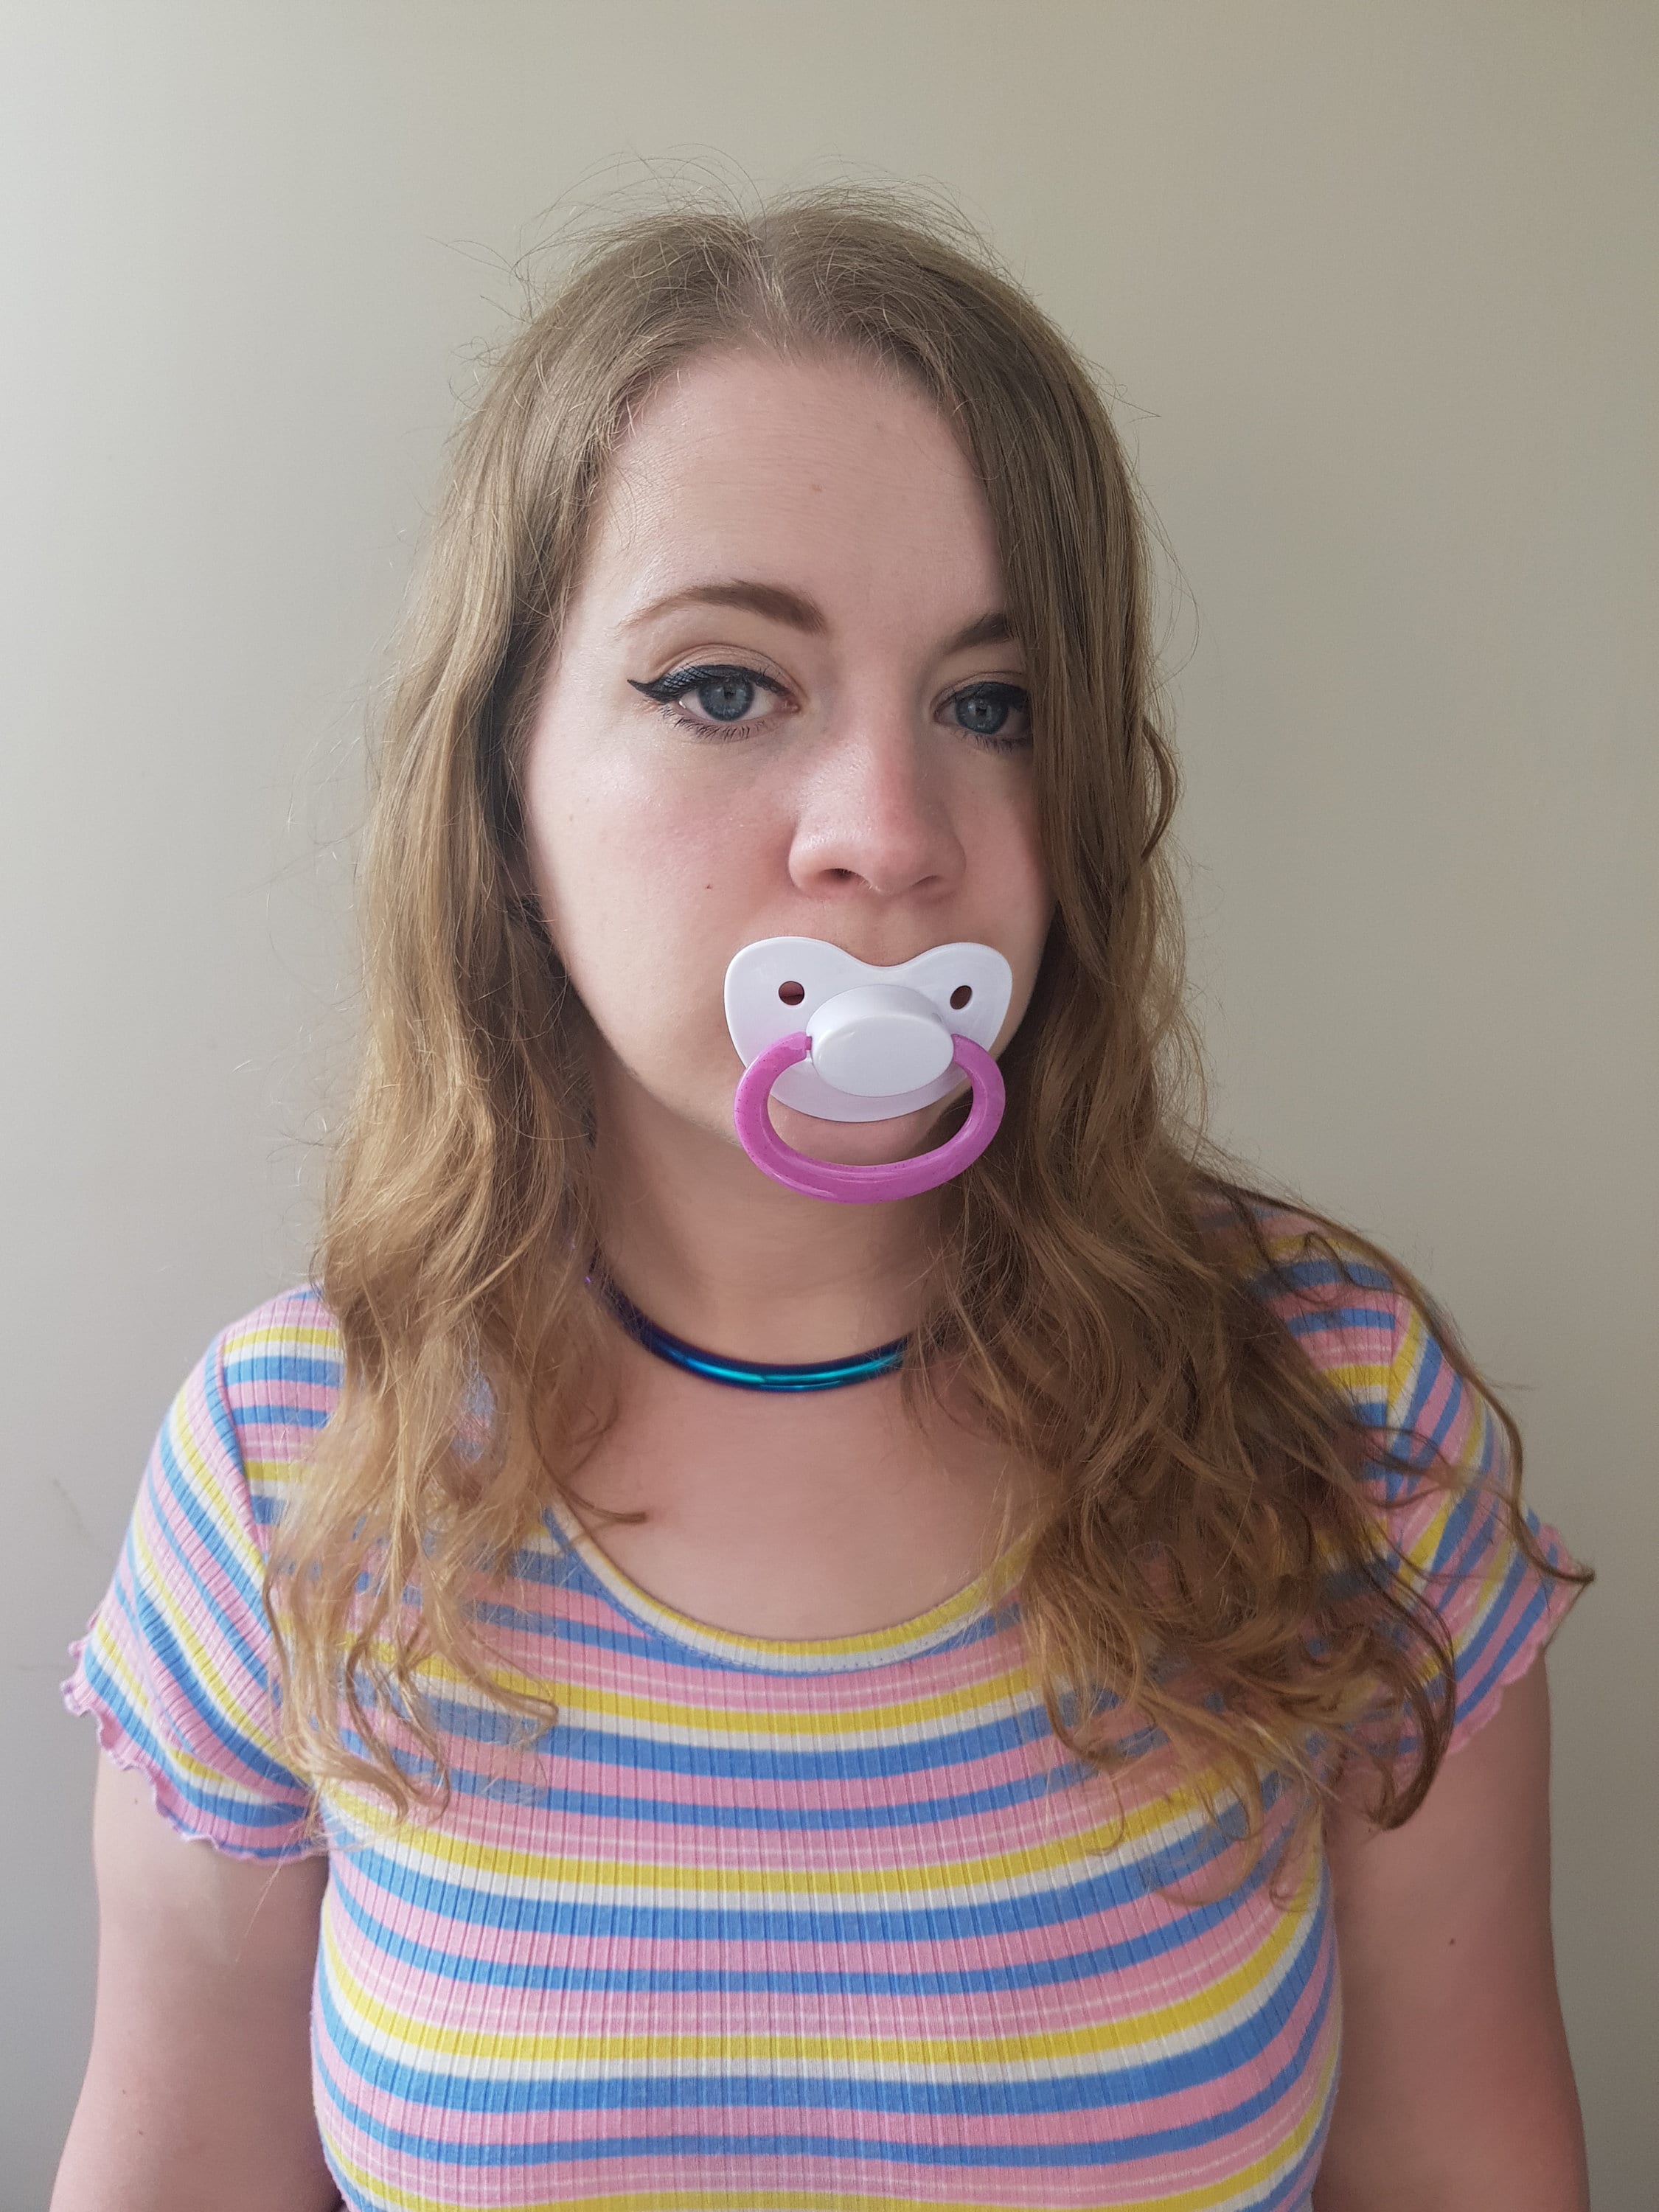 Adult Pacifier Soother Dummy from the dotty diaper Blue Alien design 